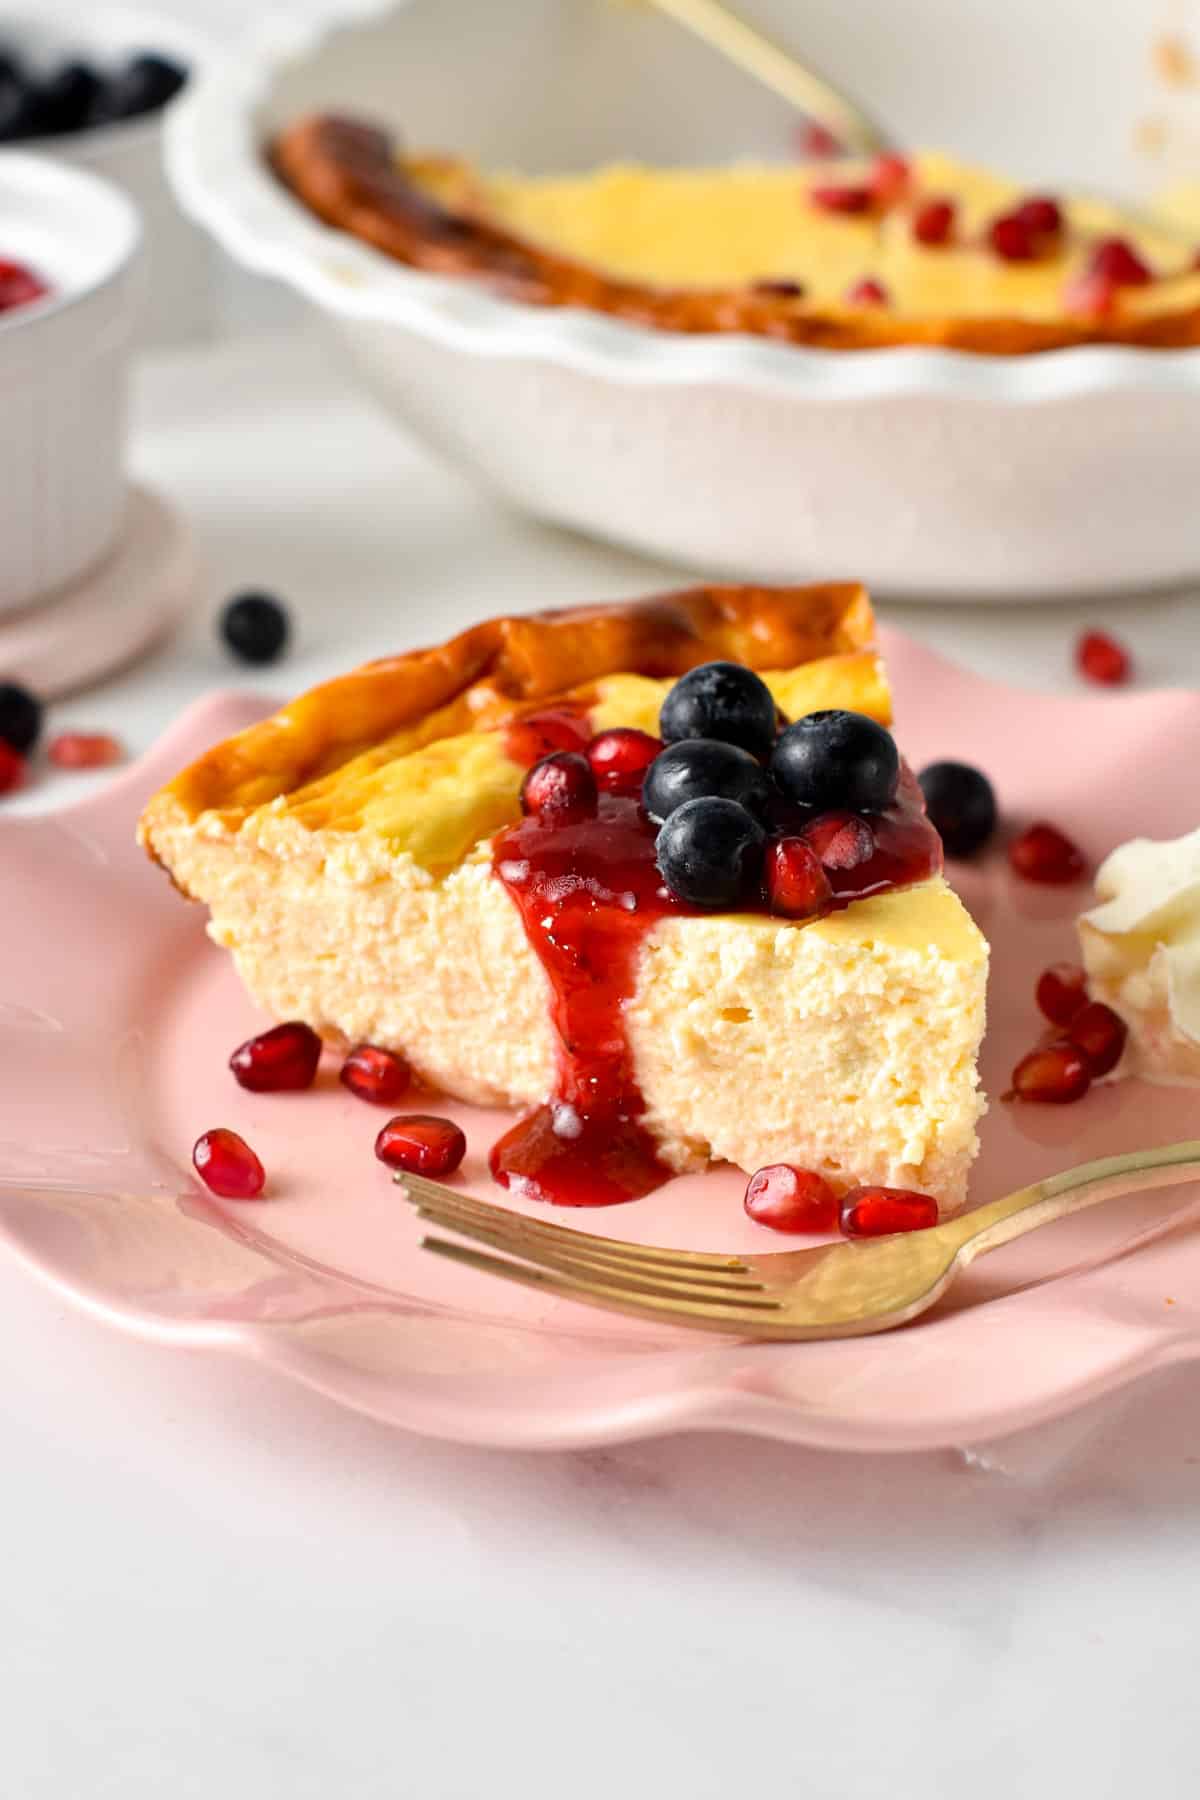 This high-protein cottage cheese cake is packed with 10 g protein per slice and only 100 kcal. Plus, it's super easy to prepare for a quick low-carb dessert.